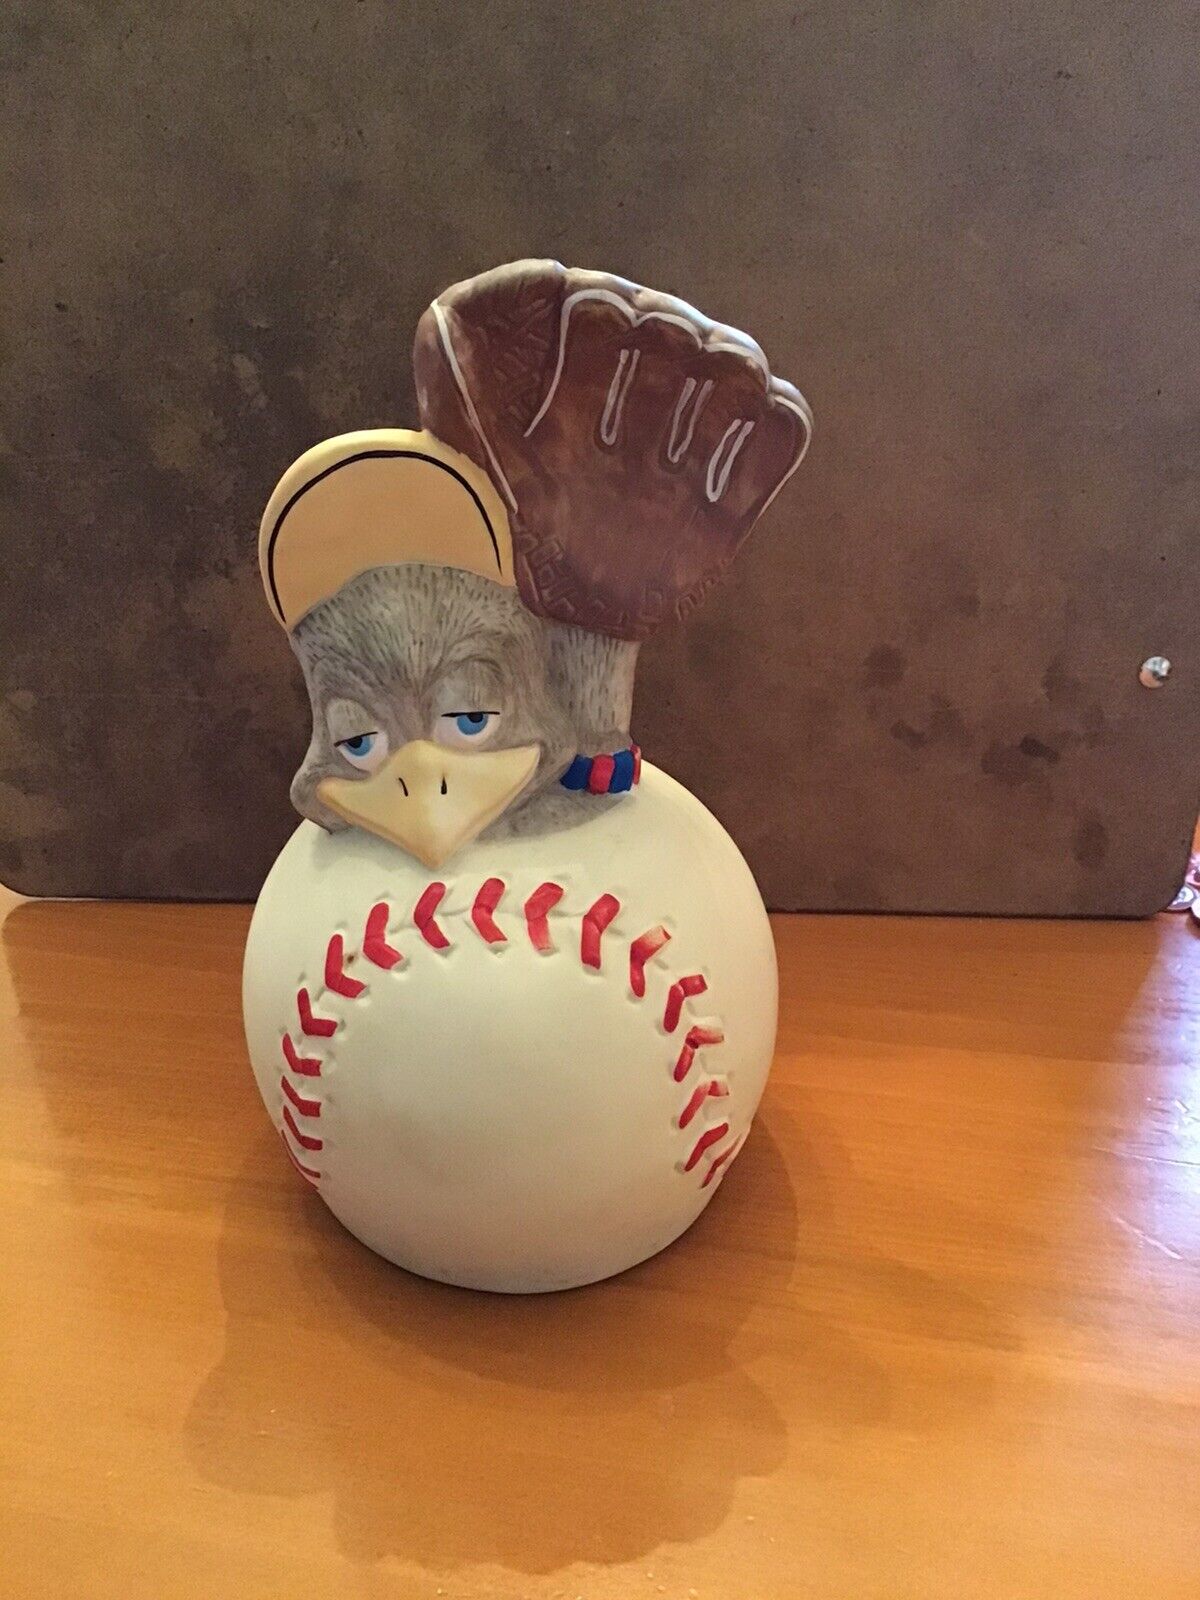 Enesco 1989 Eggbert And Friends Music Box. “ Take Me Out The Ball Game”